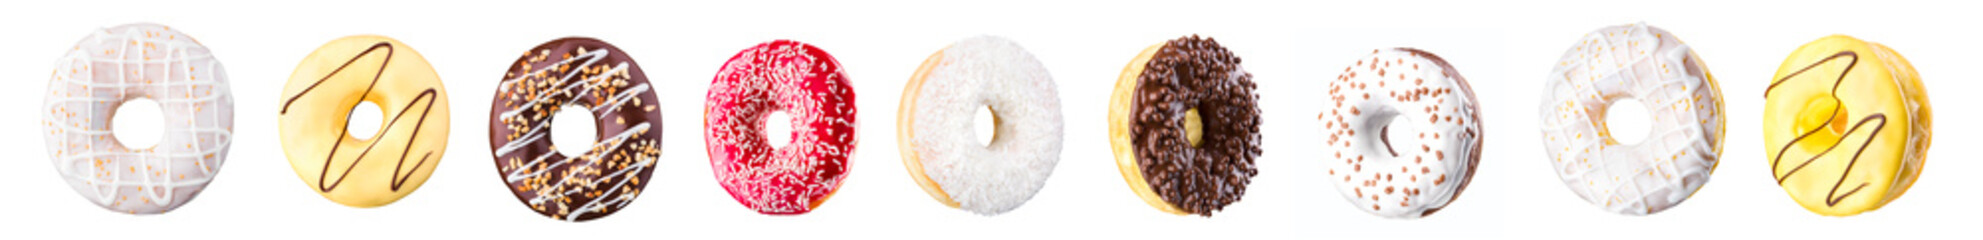 Set of chocolate glazed donut with sprinkles on a white background rotated